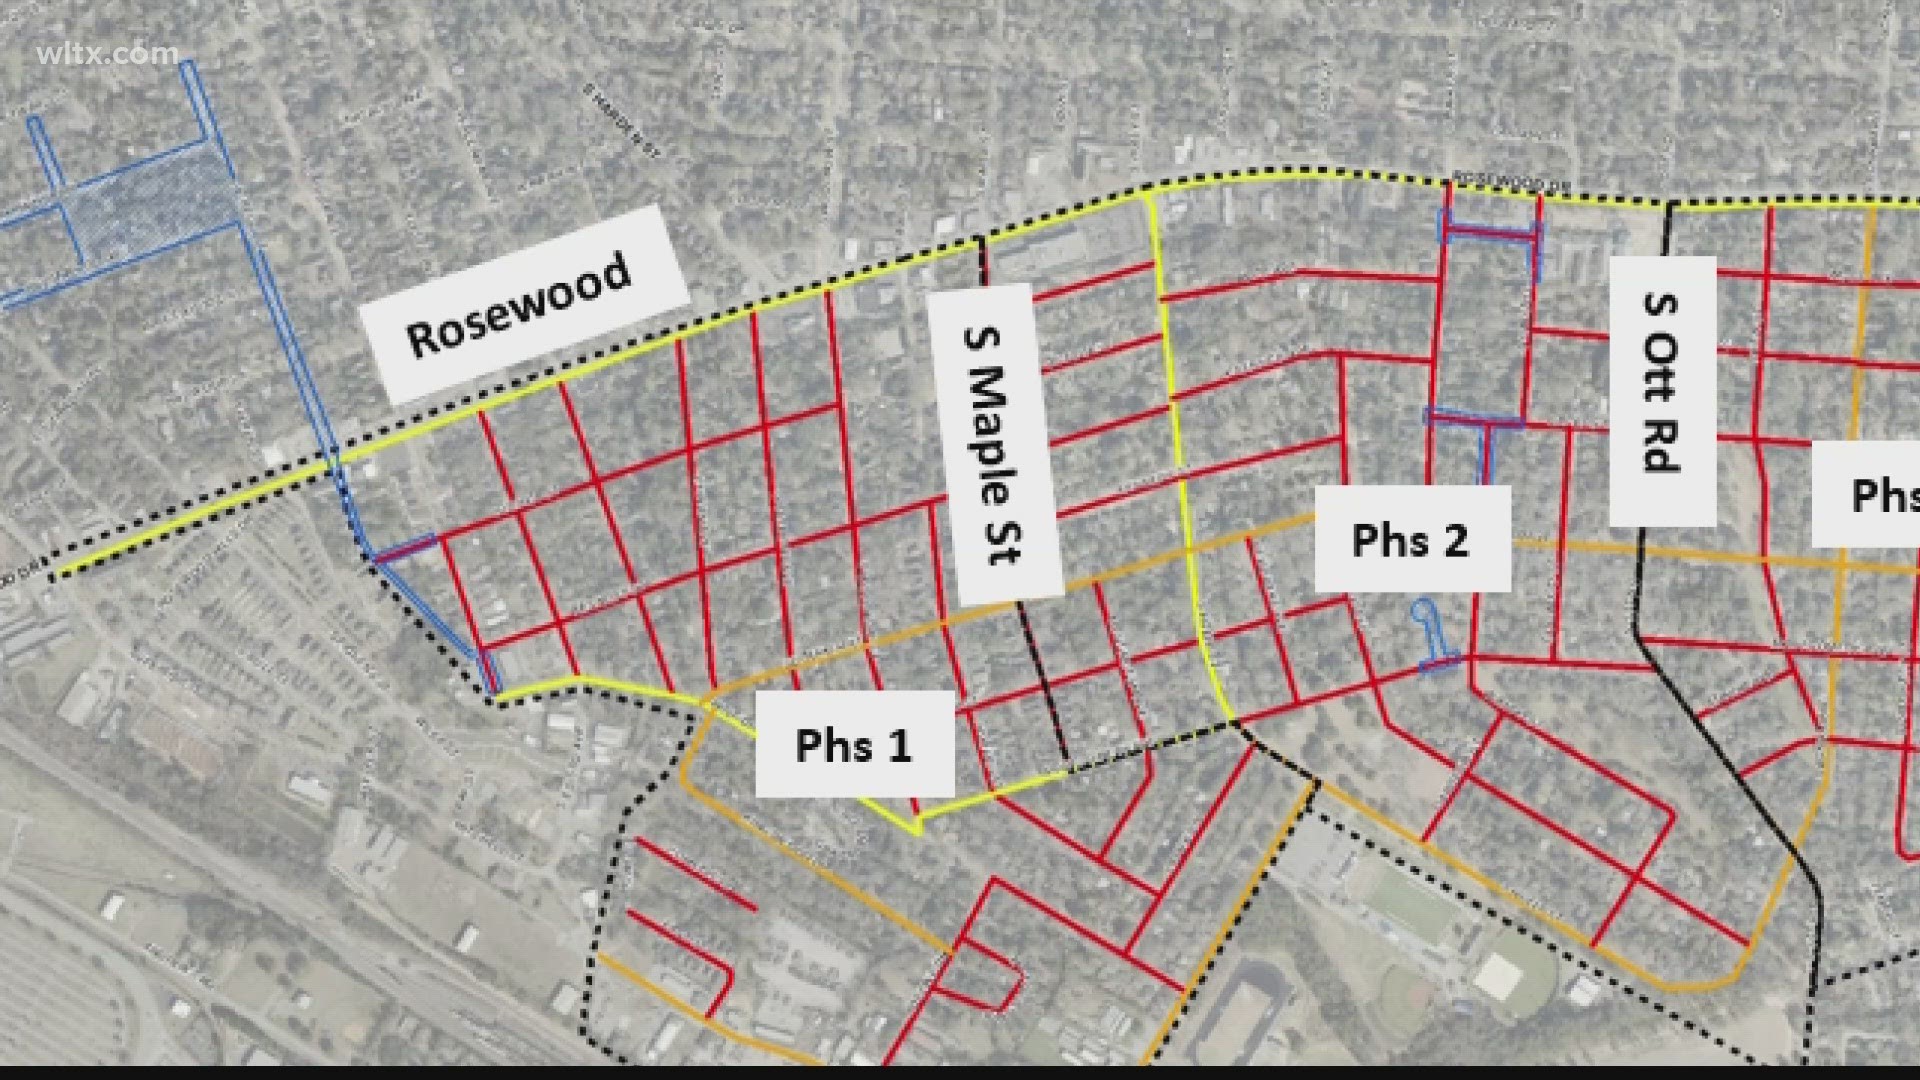 A $34M water system improvement project is set to start in the Rosewood neighborhood in the fall.